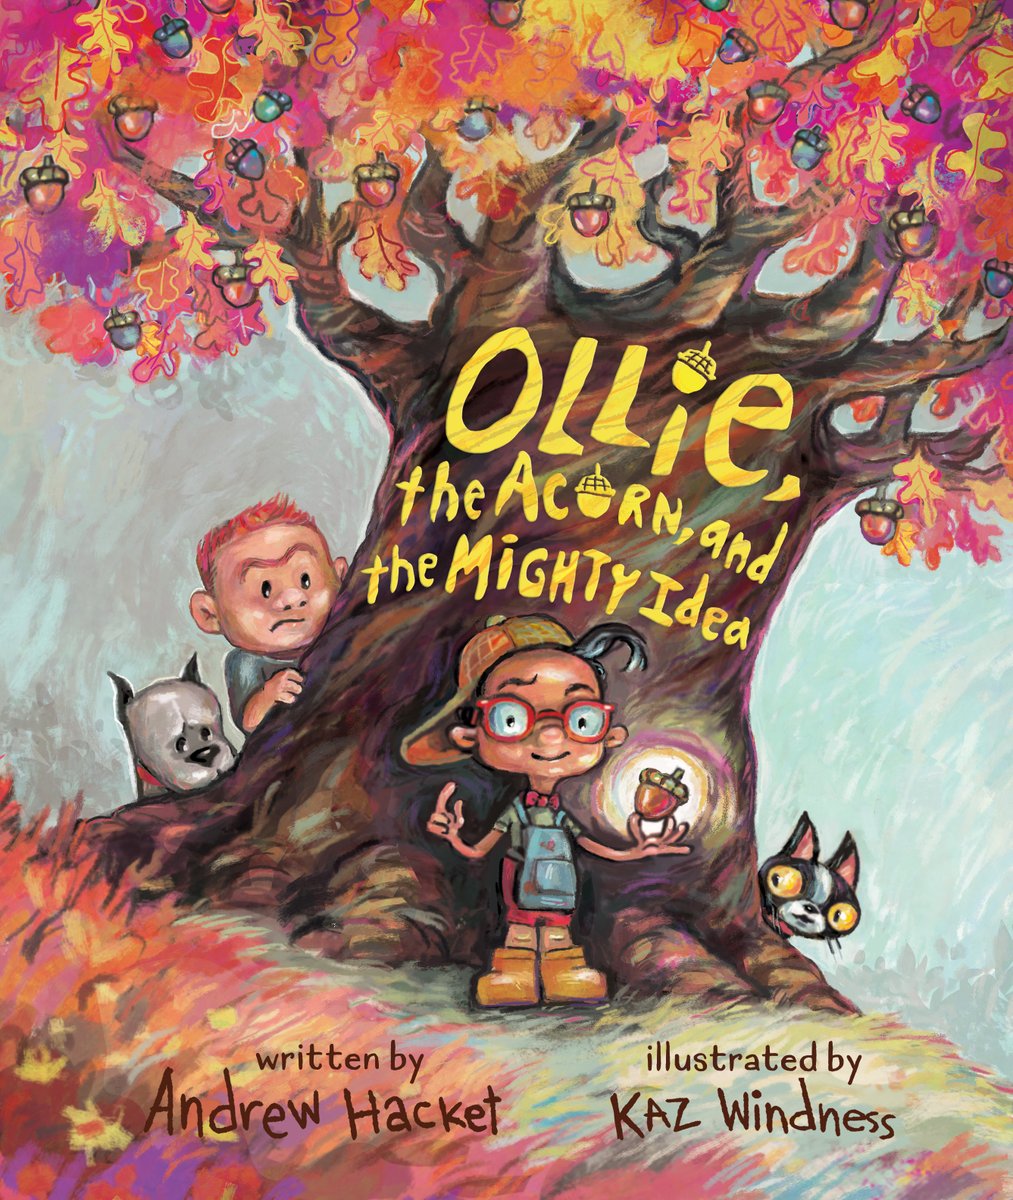 I can't believe there are only 2 months to go before the release of Ollie, the Acorn, and the Mighty Idea! @KWindness and I can't wait for you to enjoy it! Pre-orders available now. tidepoolbookshop.com/book/978164567… #kidlit #OllietheAcorn